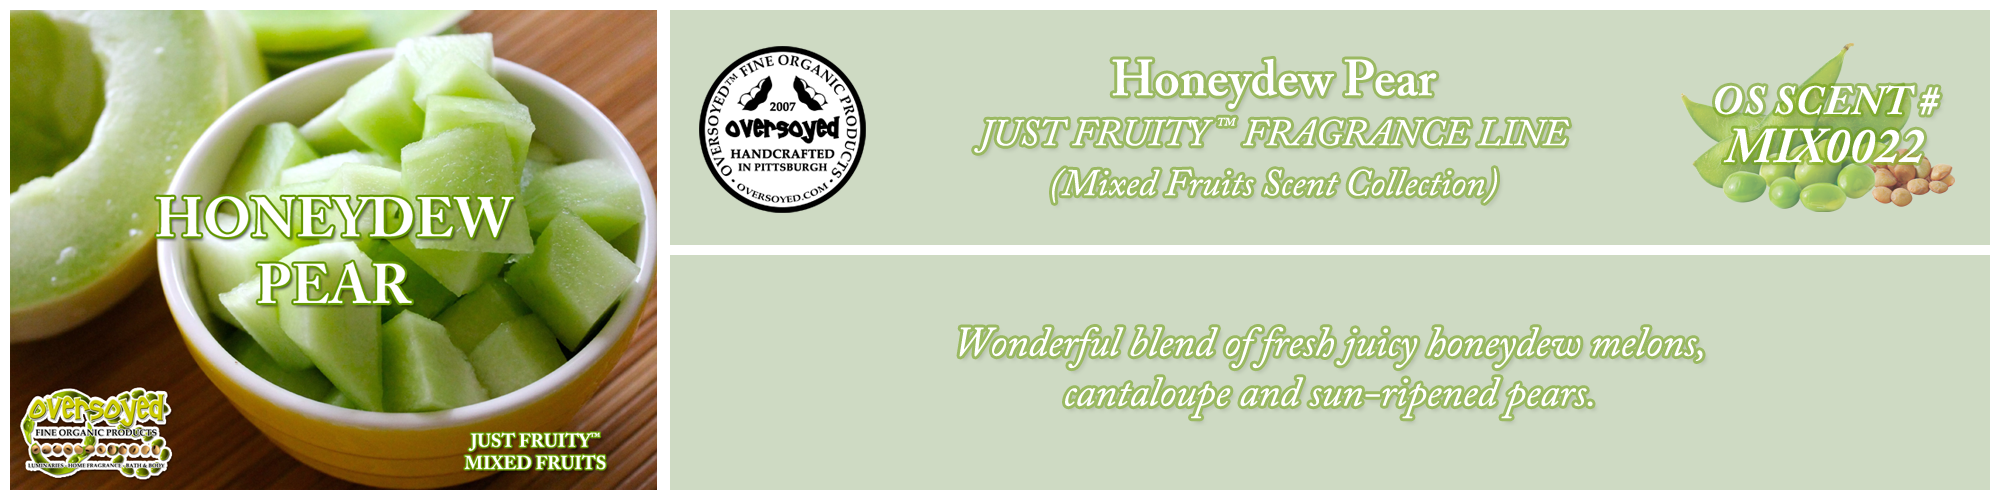 Honeydew Pear Handcrafted Products Collection